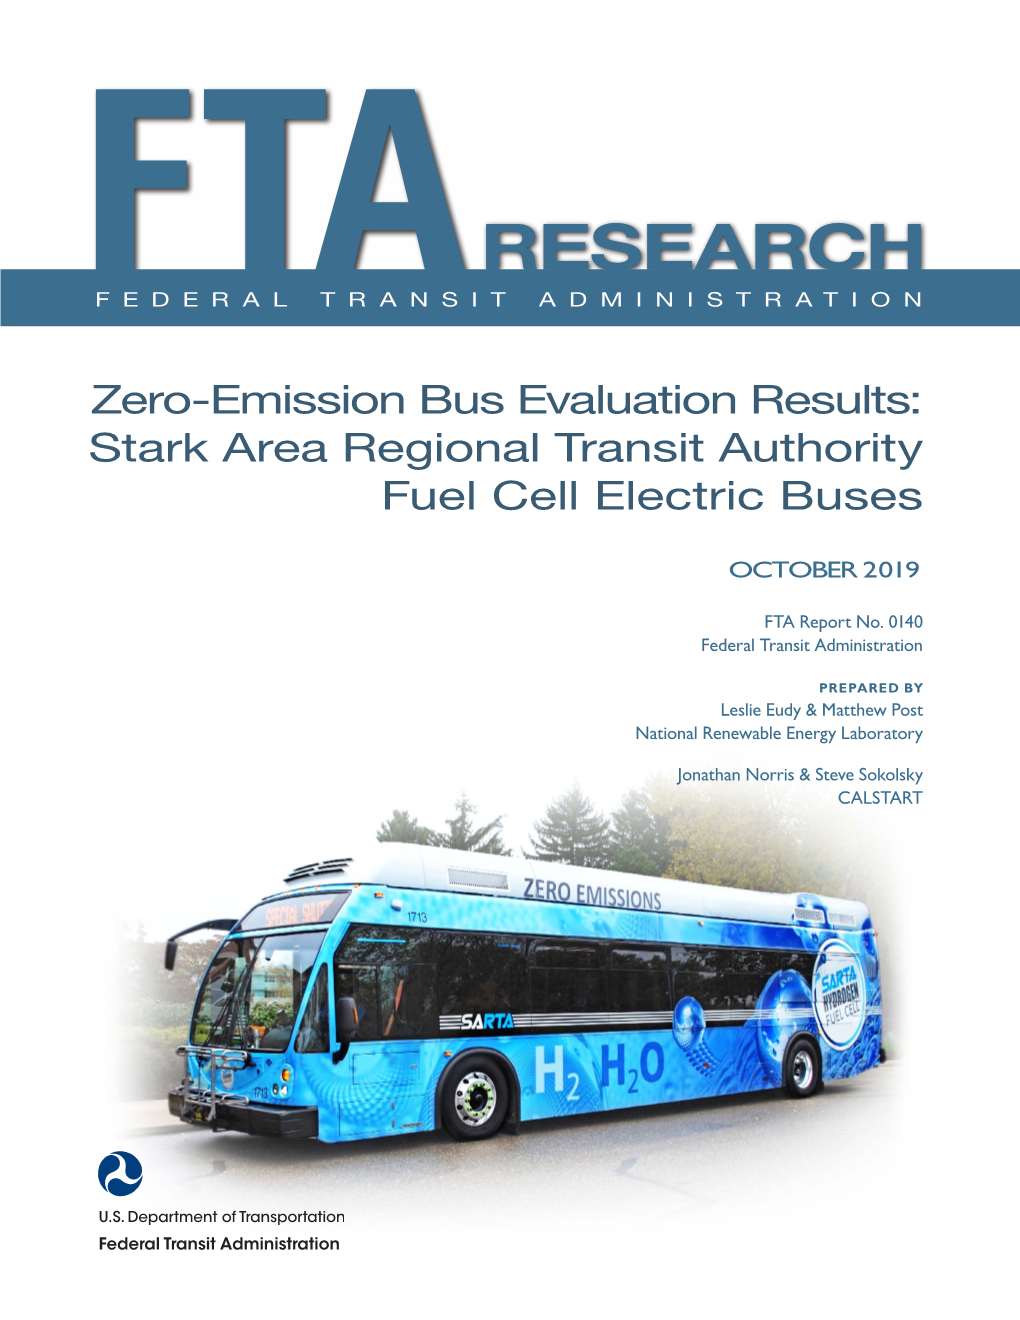 Zero-Emission Bus Evaluation Results: Stark Area Regional Transit Authority Fuel Cell Electric Buses